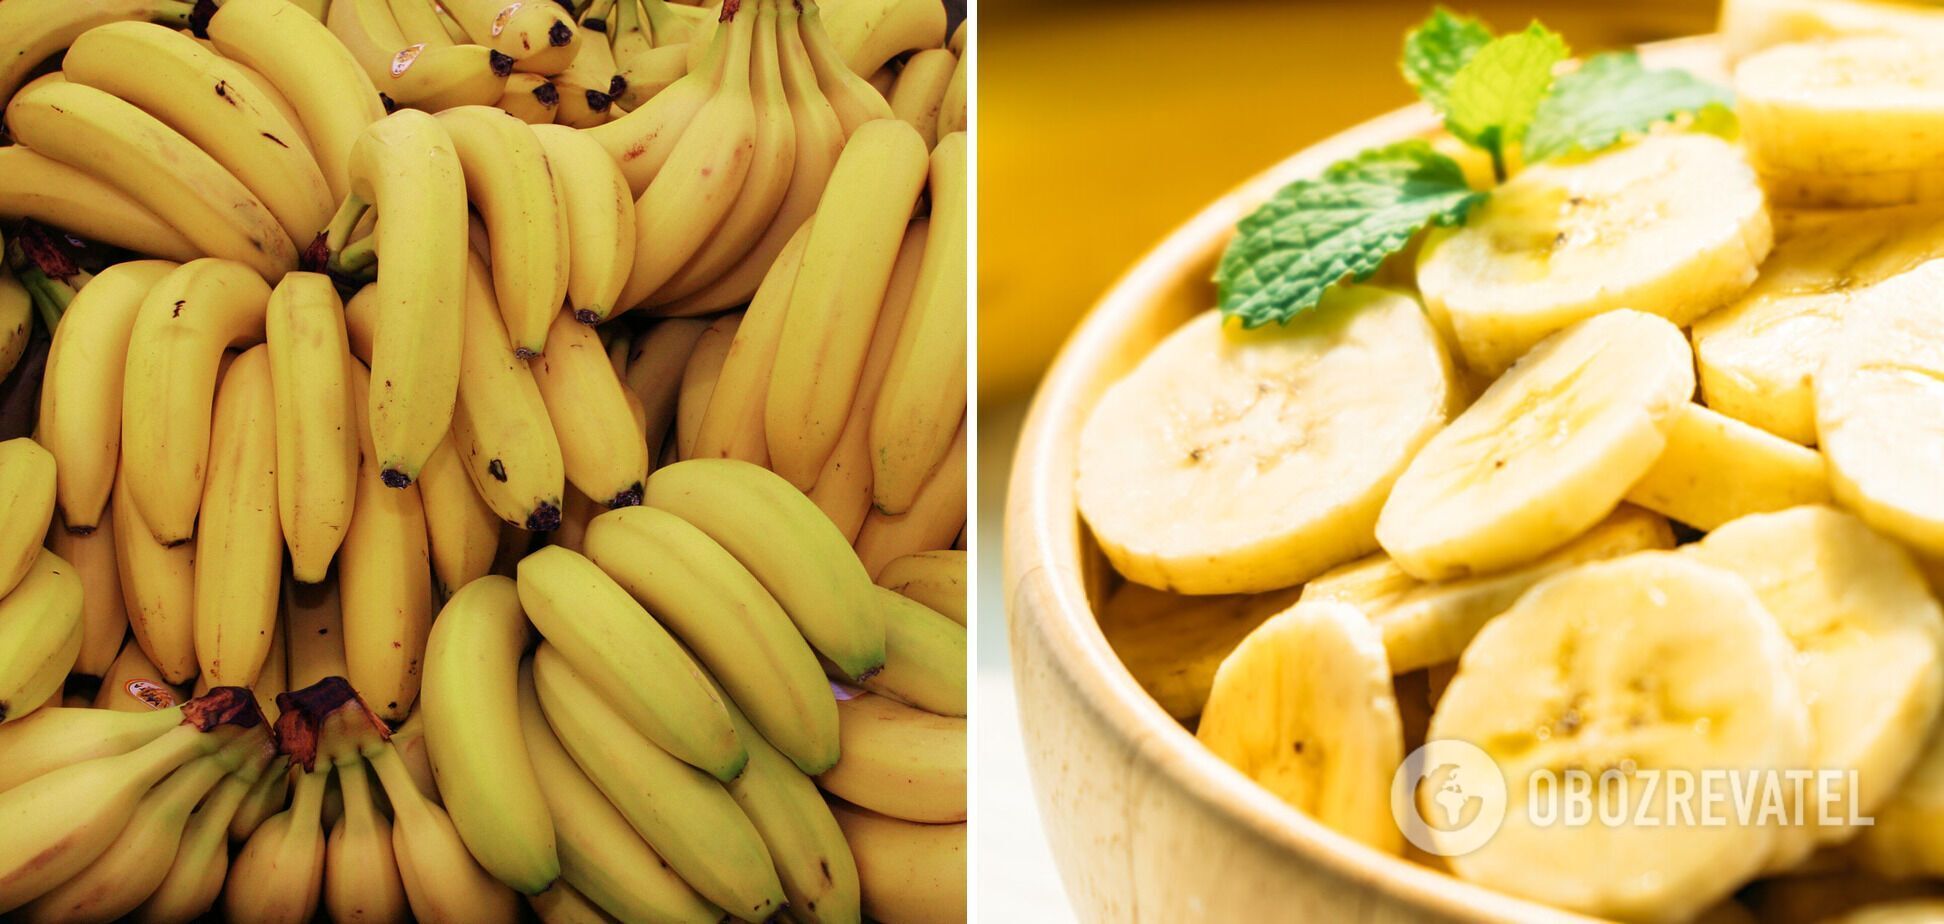 Bananas will stay incredibly fresh and tasty for up to six months: a simple life hack